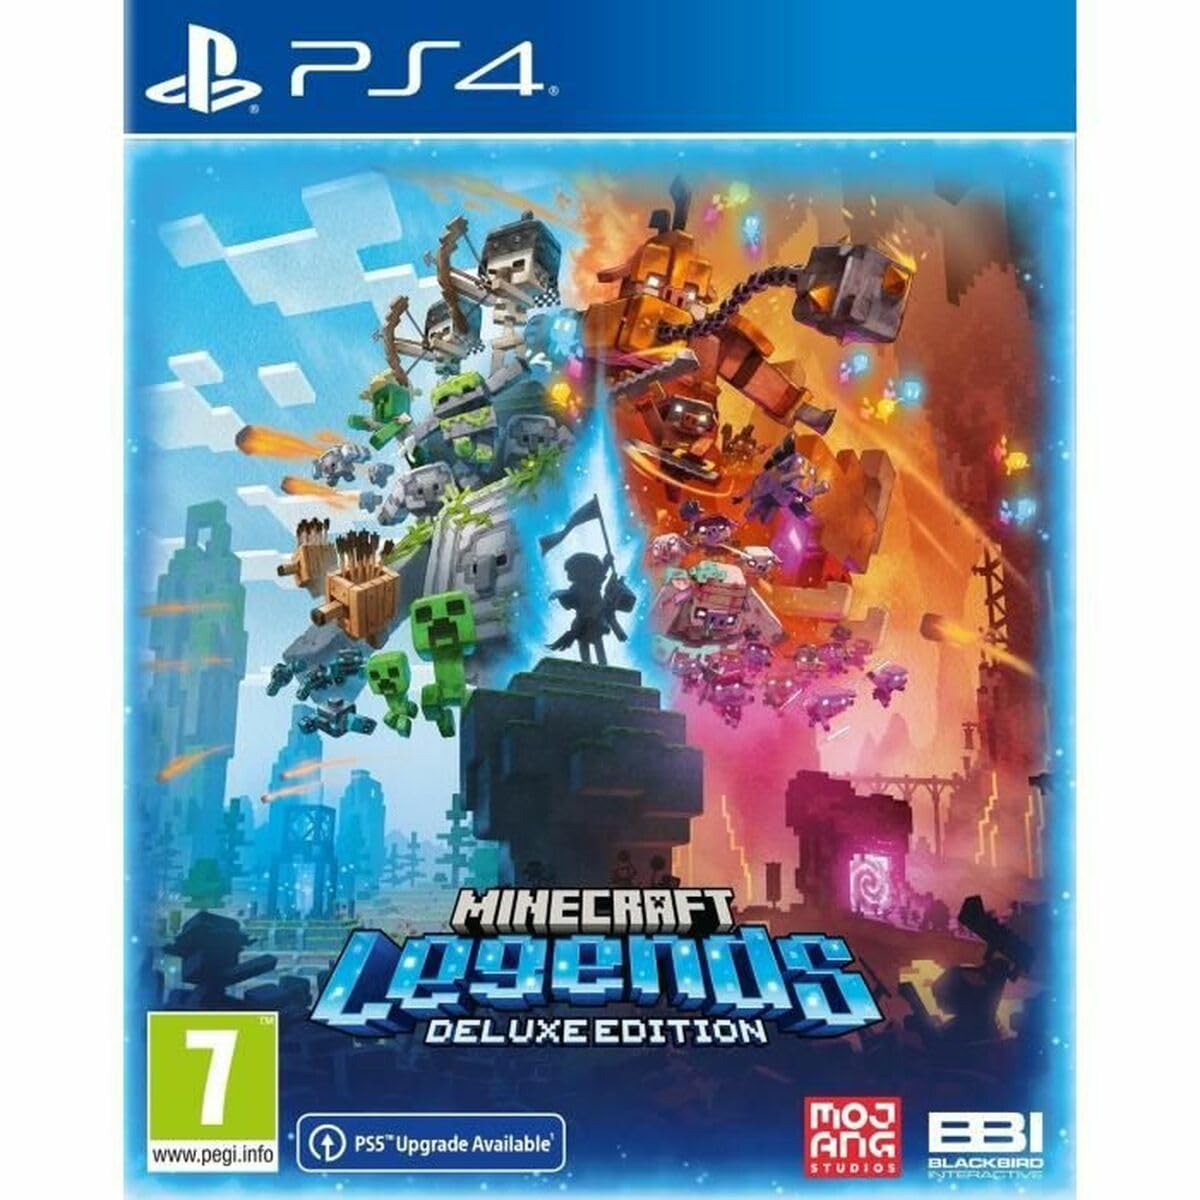 vogue  Minecraft Legends - Deluxe Edition - PS4 SPg1FEWp9 grand